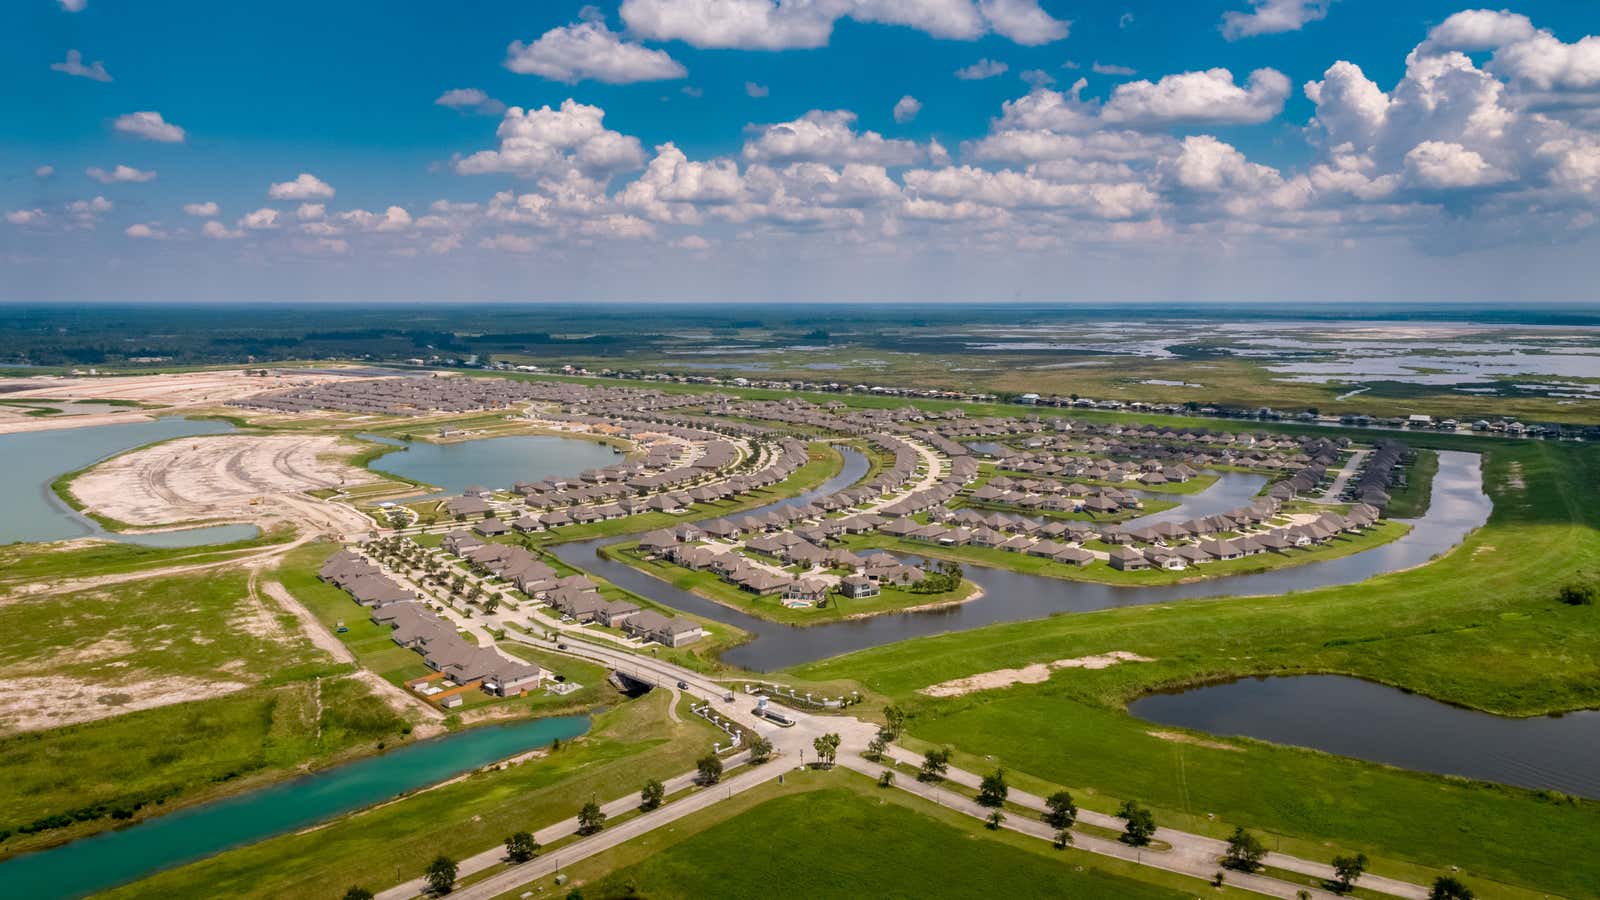 Louisiana residents are moving to escape hurricanes and inexorable land loss. But their destinations—like this rapidly-growing subdivision—could present their own challenges.